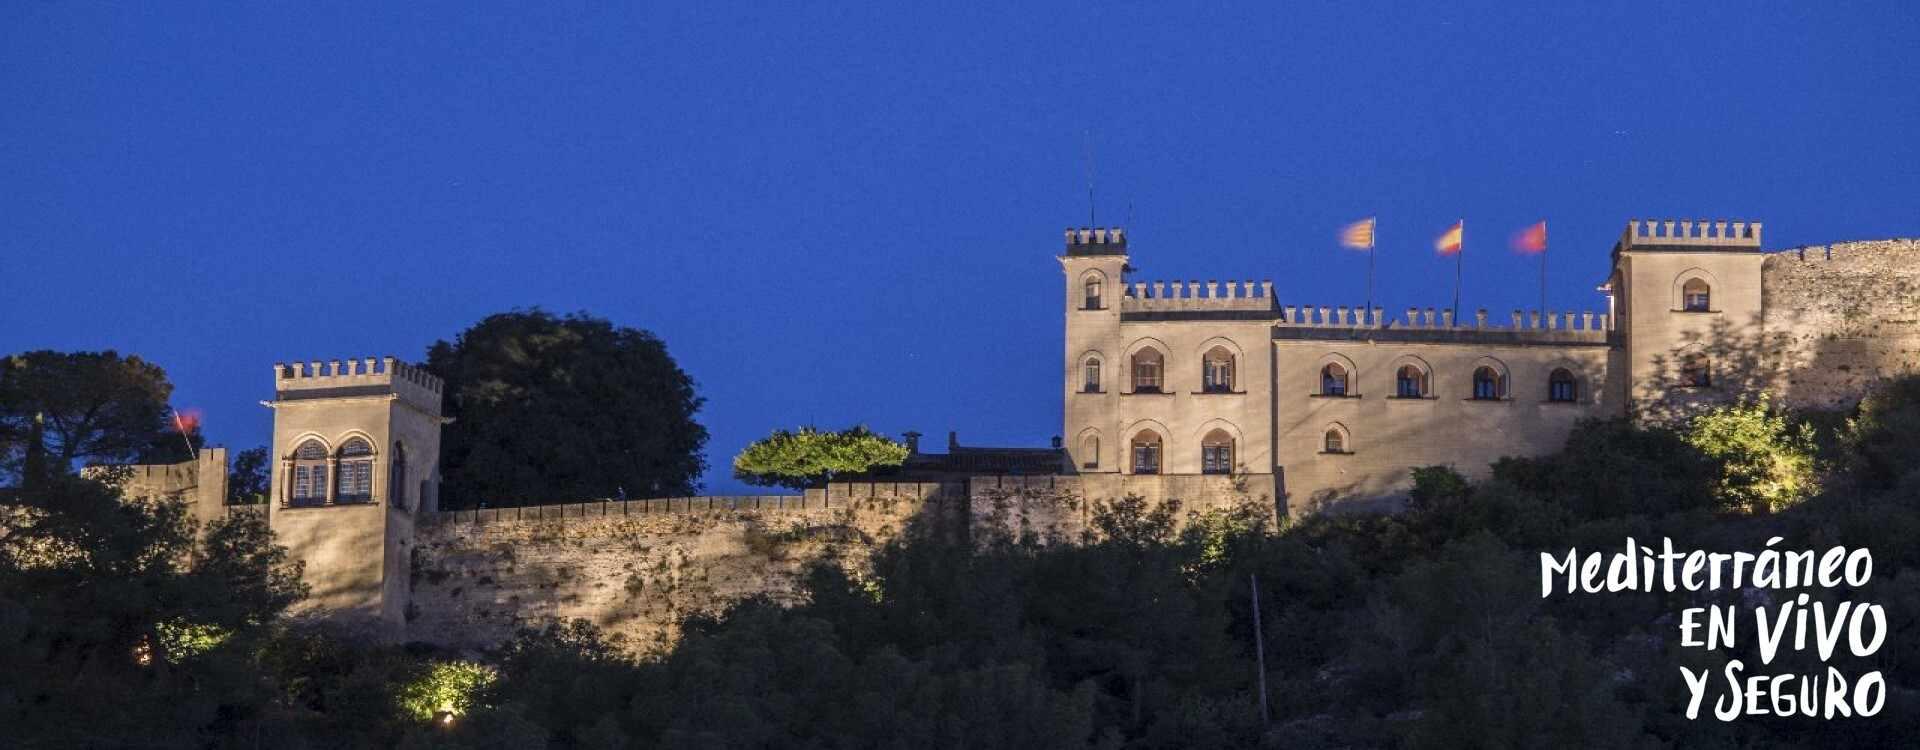  Image of the Castle of Xàtiva lit up at night 	